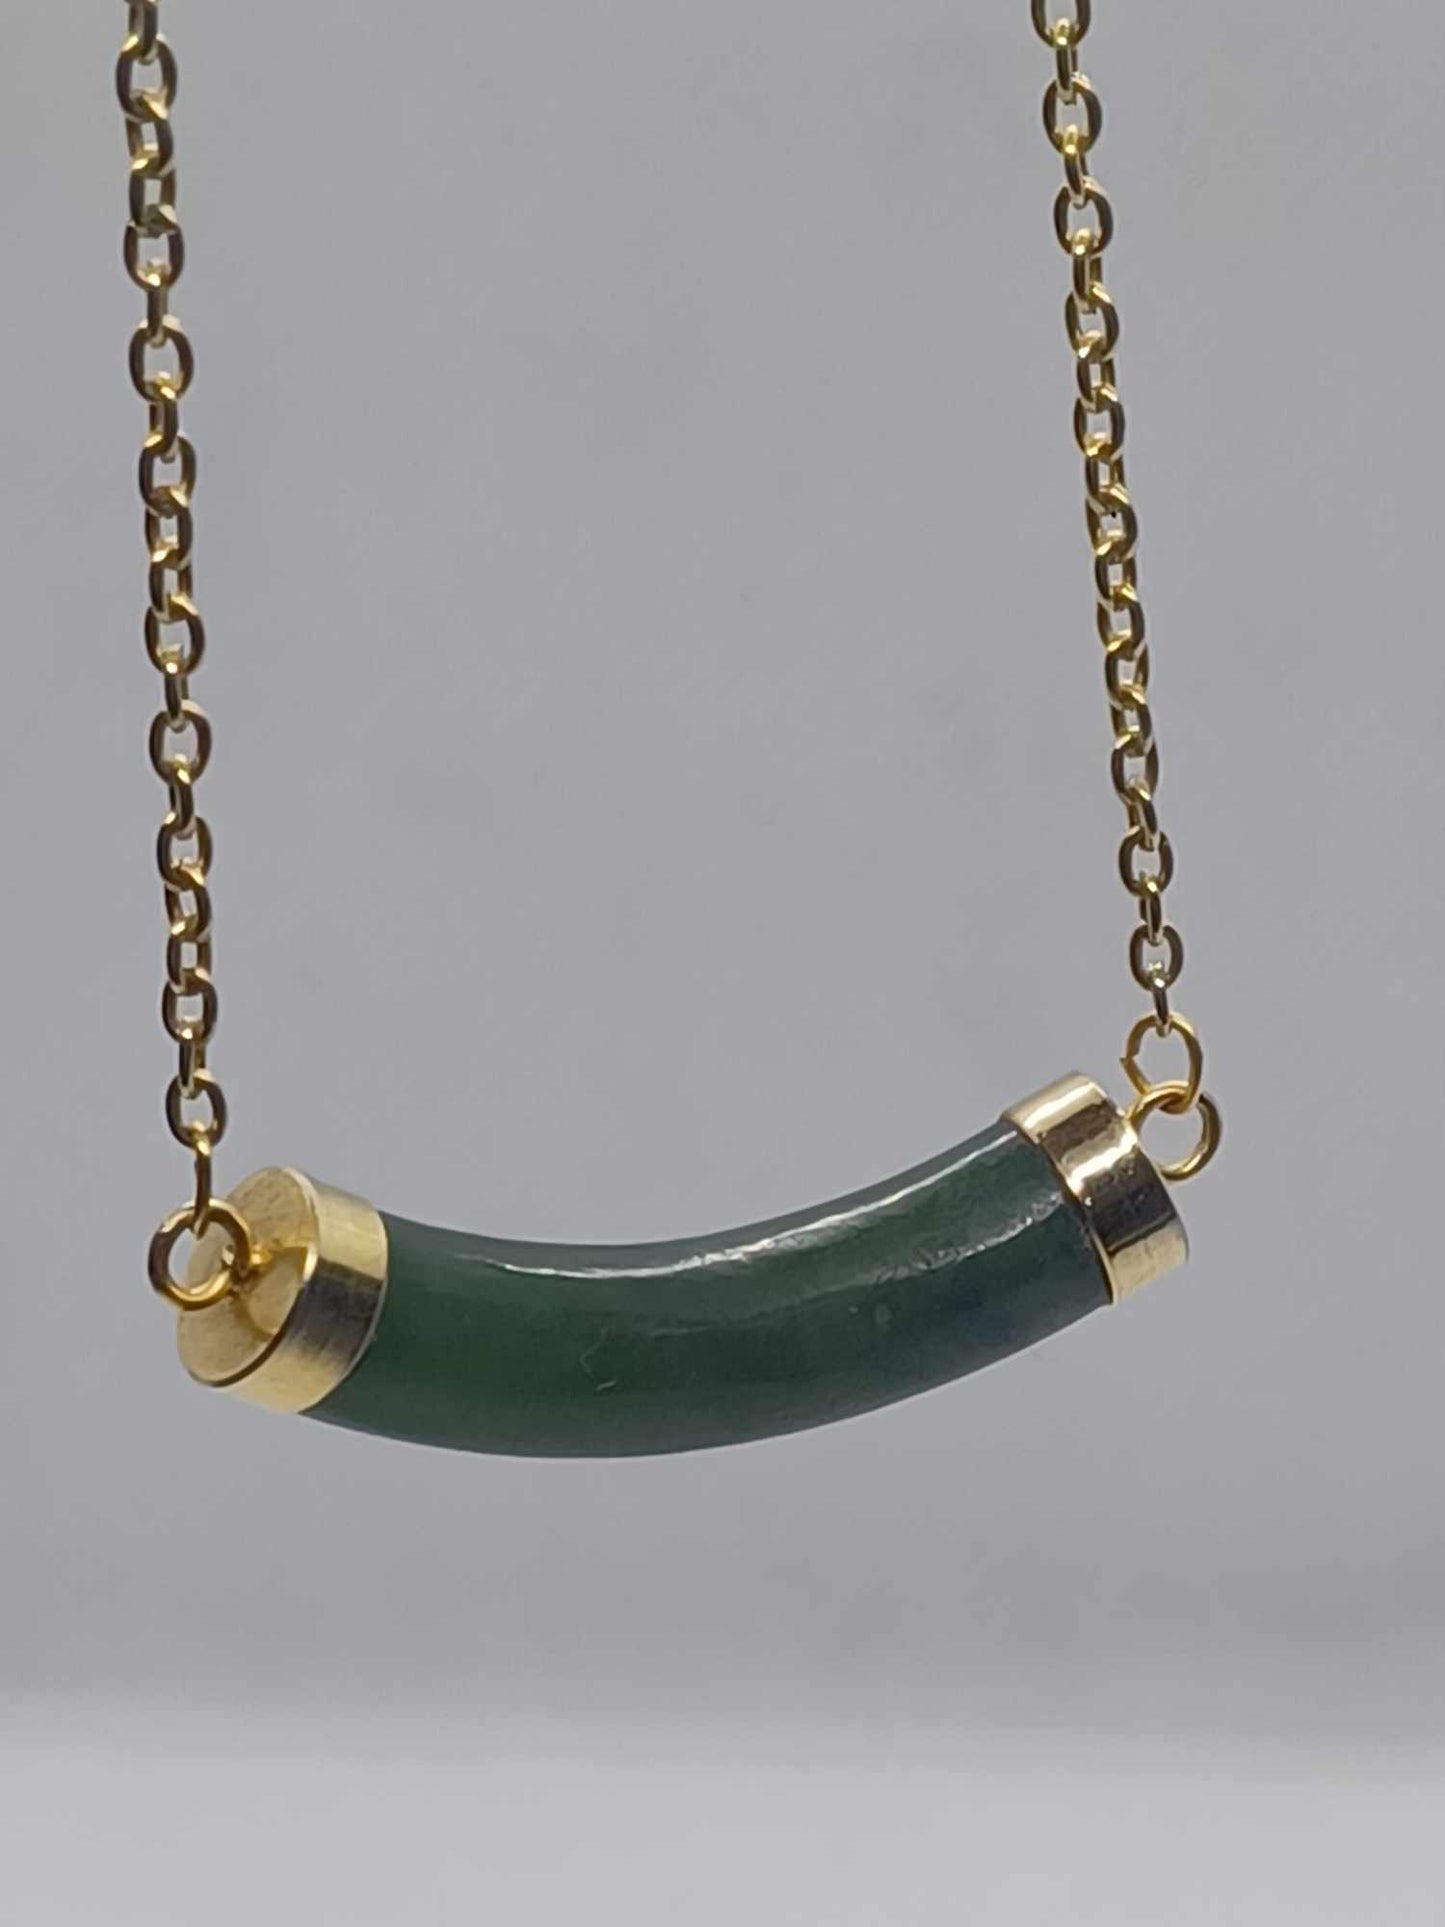 Double-Linked BC Nephrite Jade Necklace